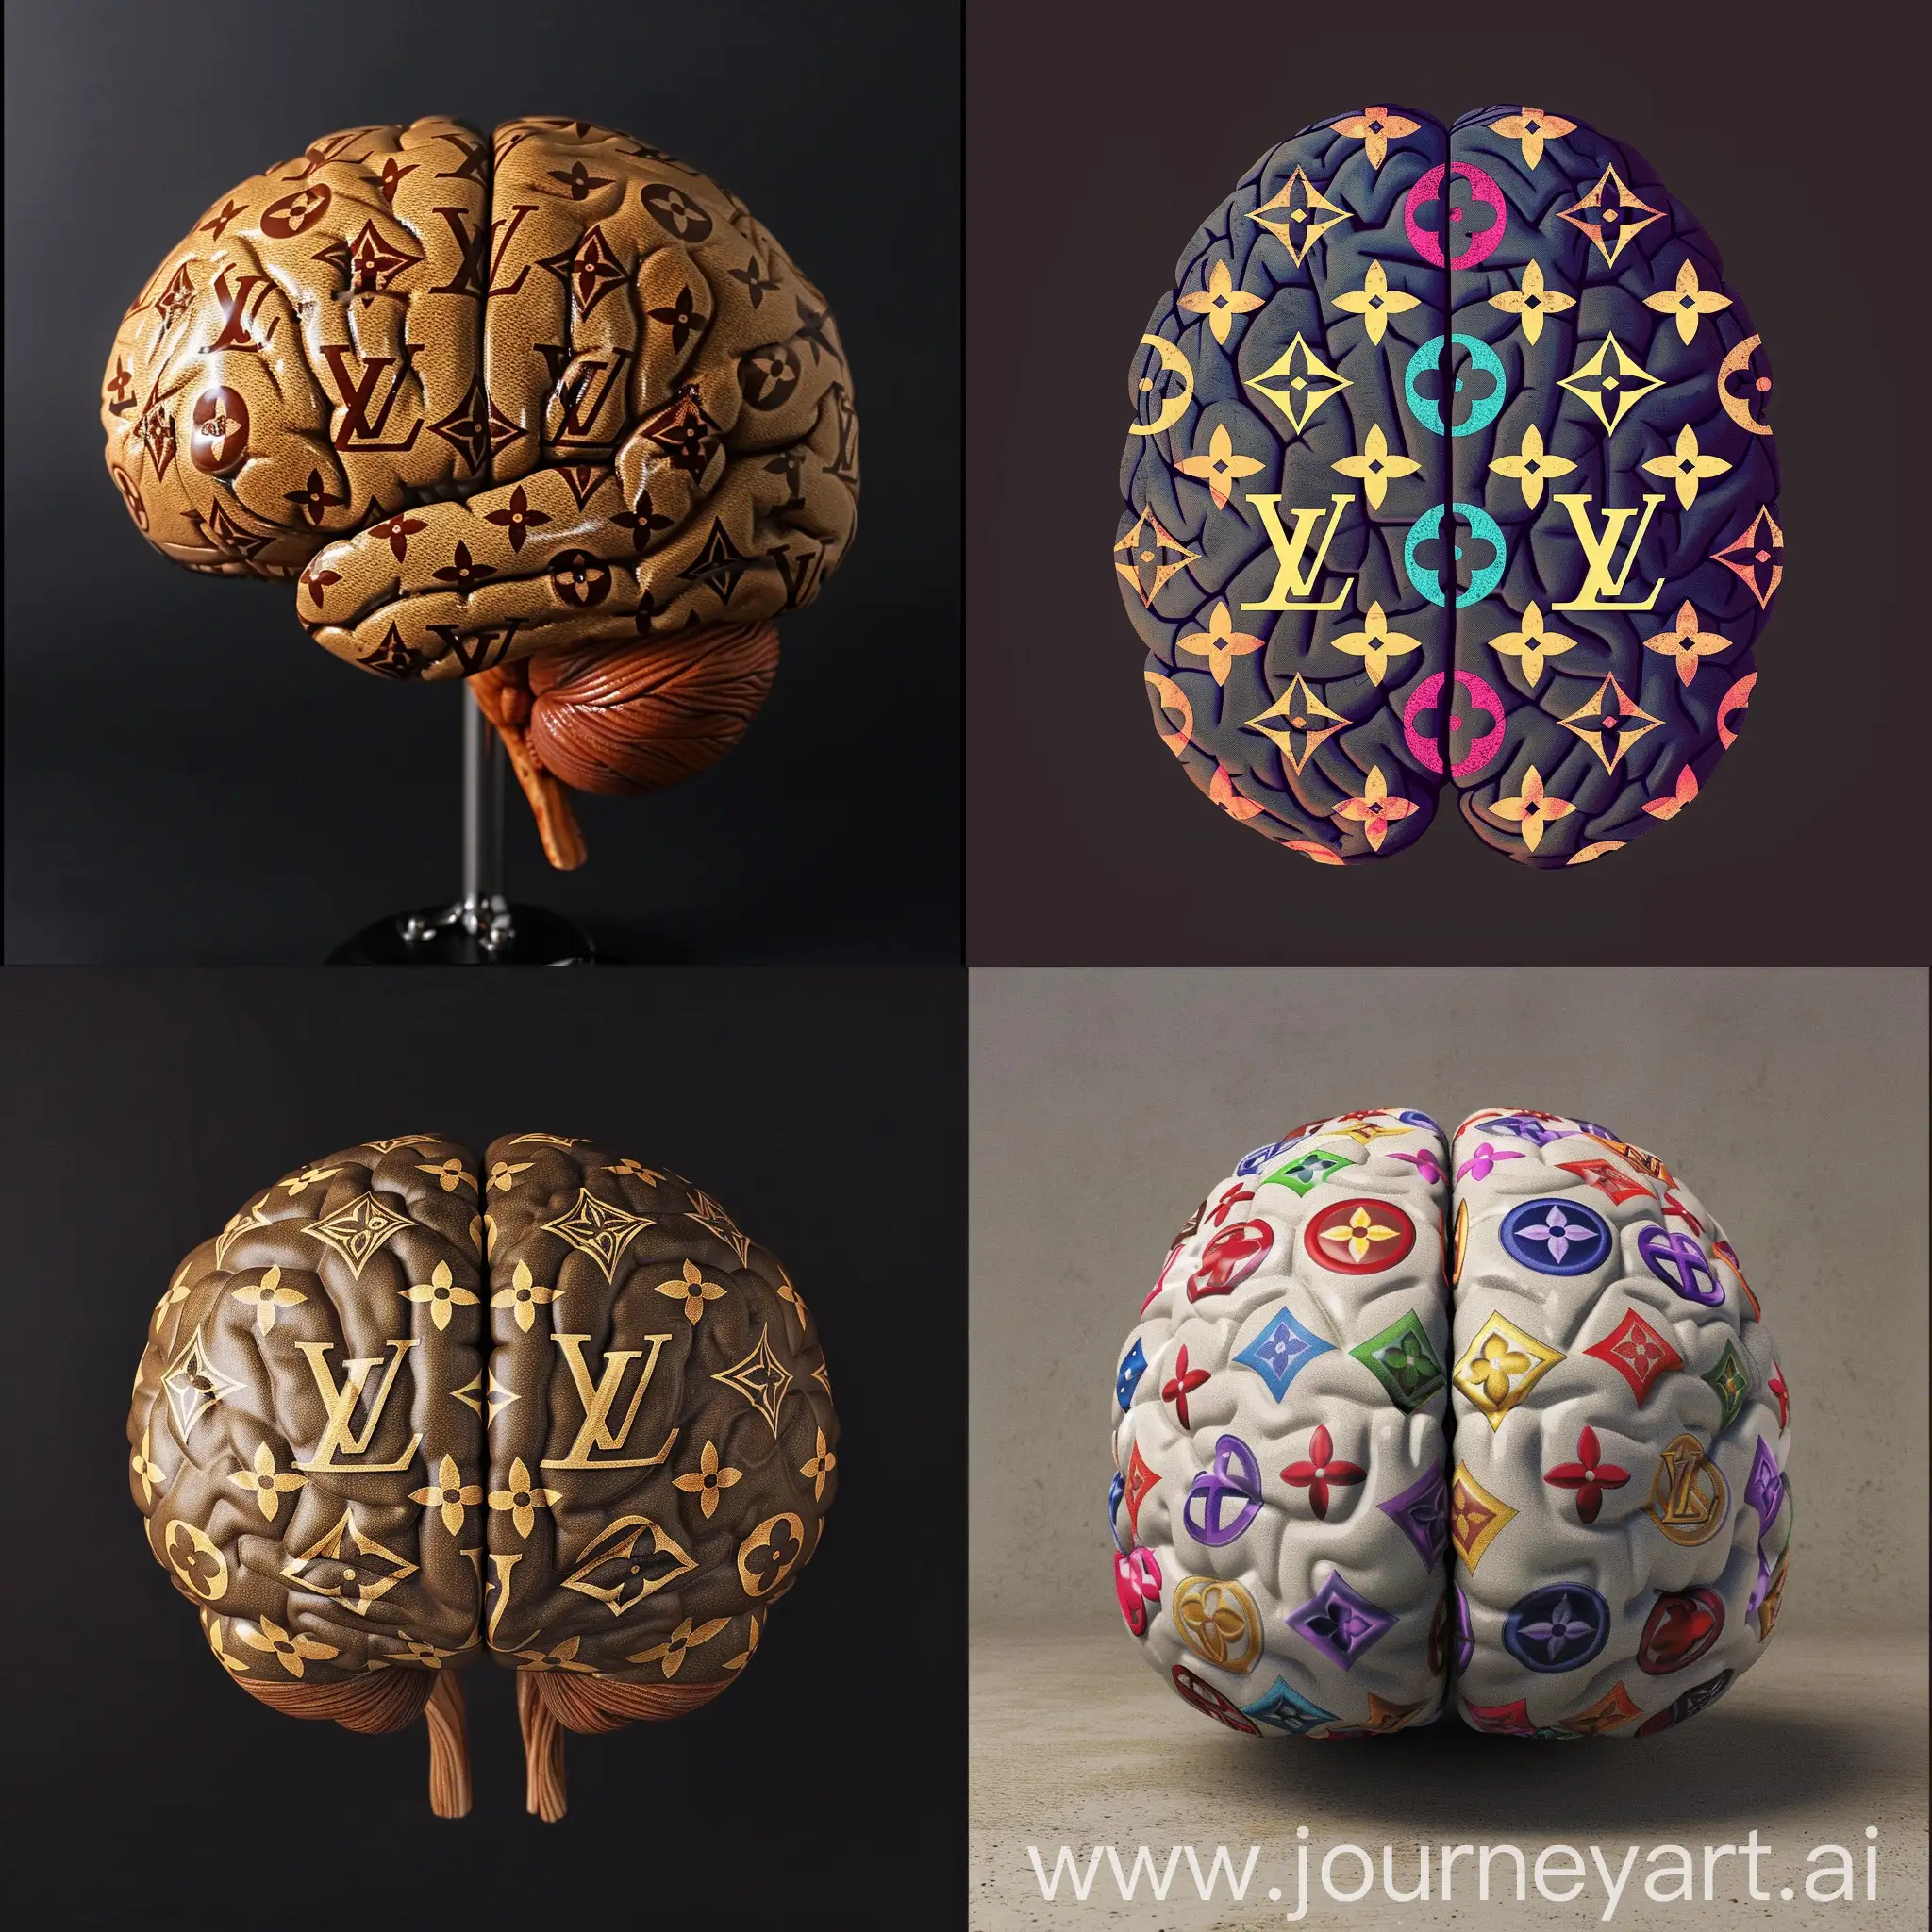 Fashion-BrandInspired-Brain-with-Louis-Vuitton-and-Famous-Logos